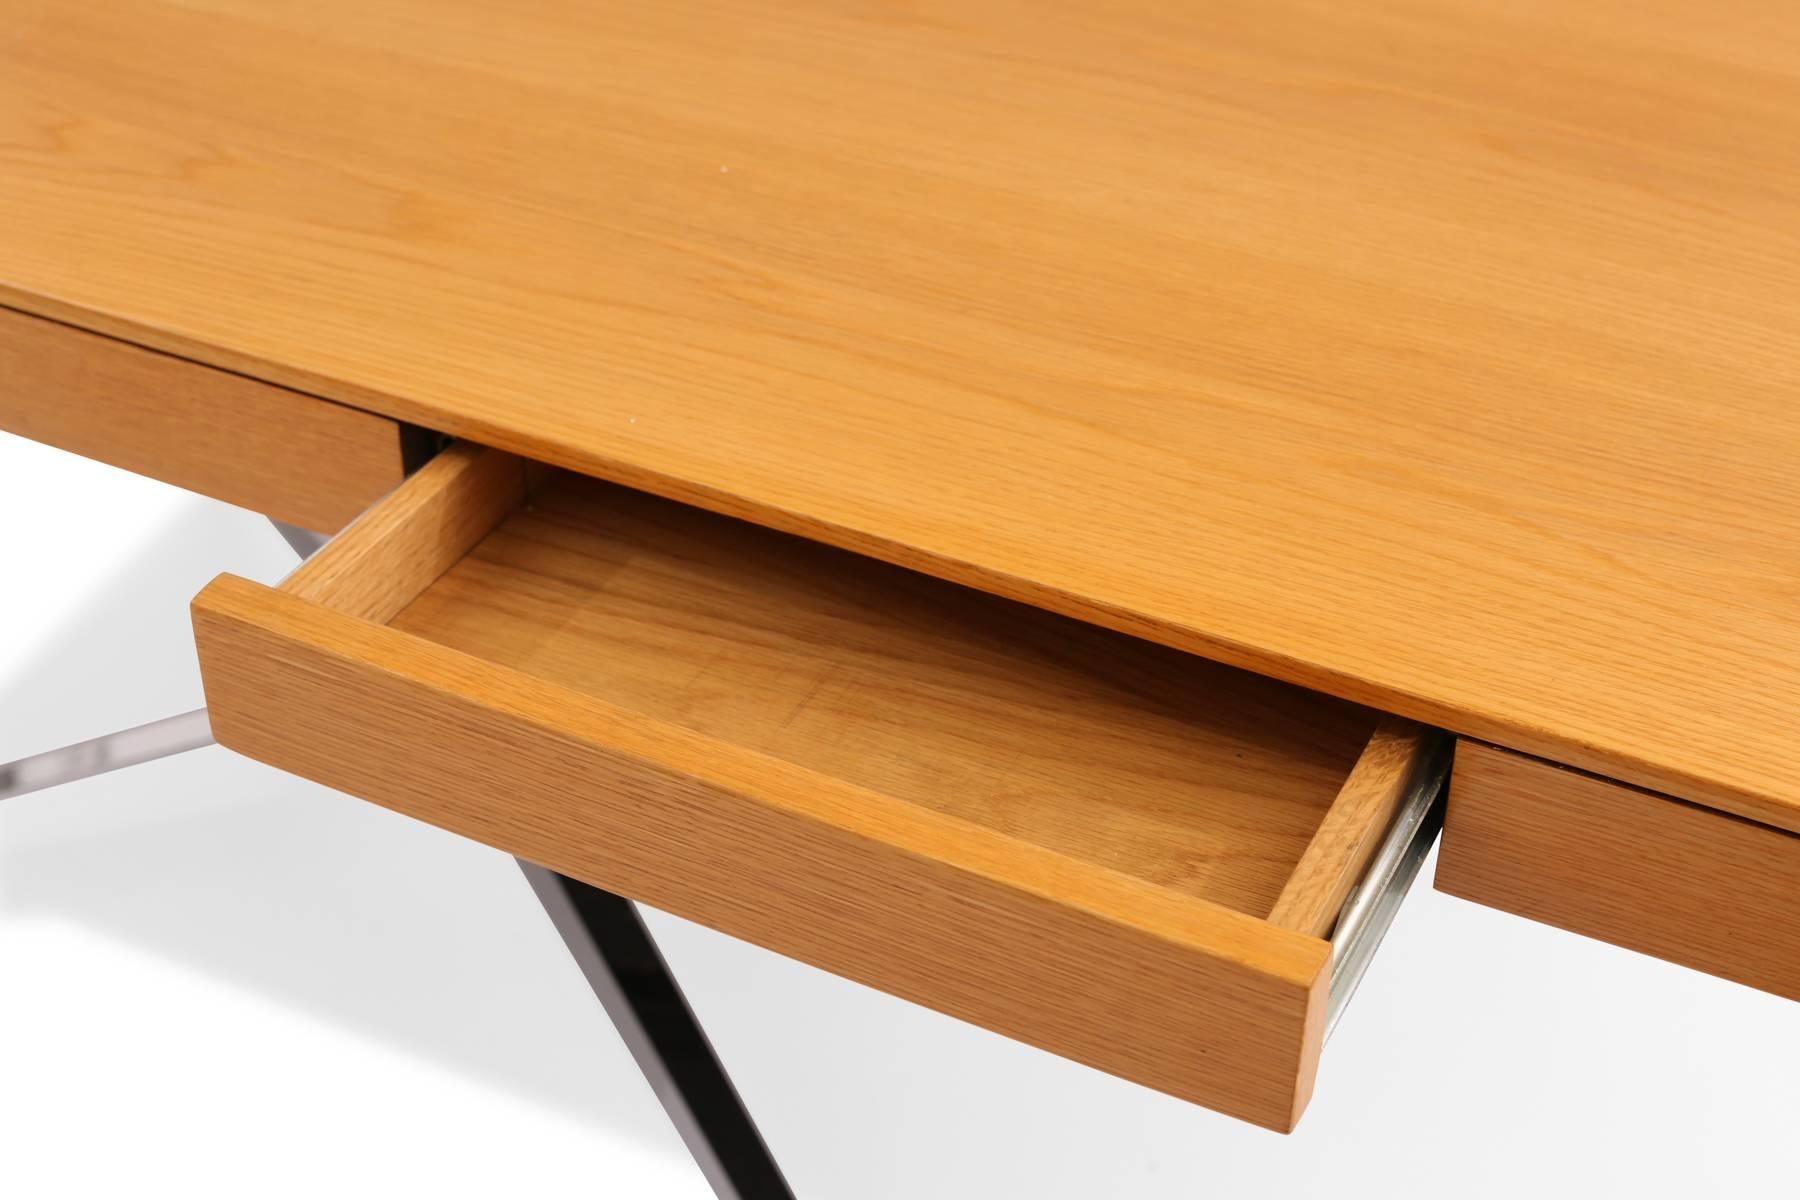 Florence Knoll for Knoll partners desk, circa mid-1970s. This example has a beautifully grained and newly finished oak top, with two drawers on each side and chrome-plated steel X-base.